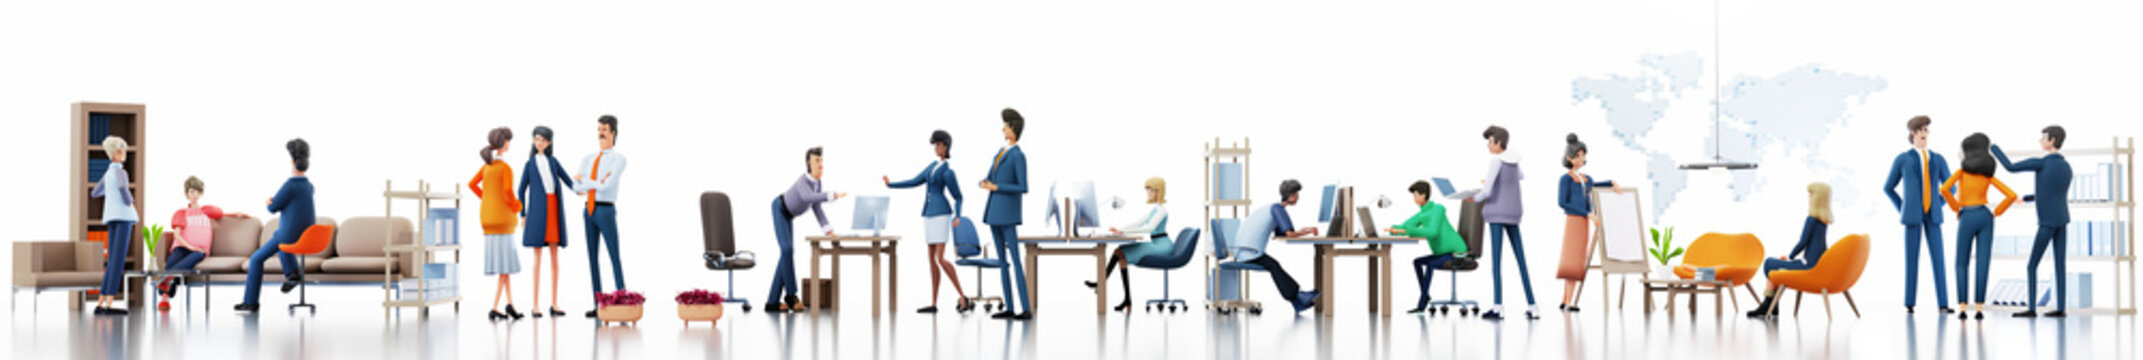 Office with lots of working people, big business team working together in open plan working space. Business people having meeting, discussing  deal. Panoramic view. 3D rendering illustration